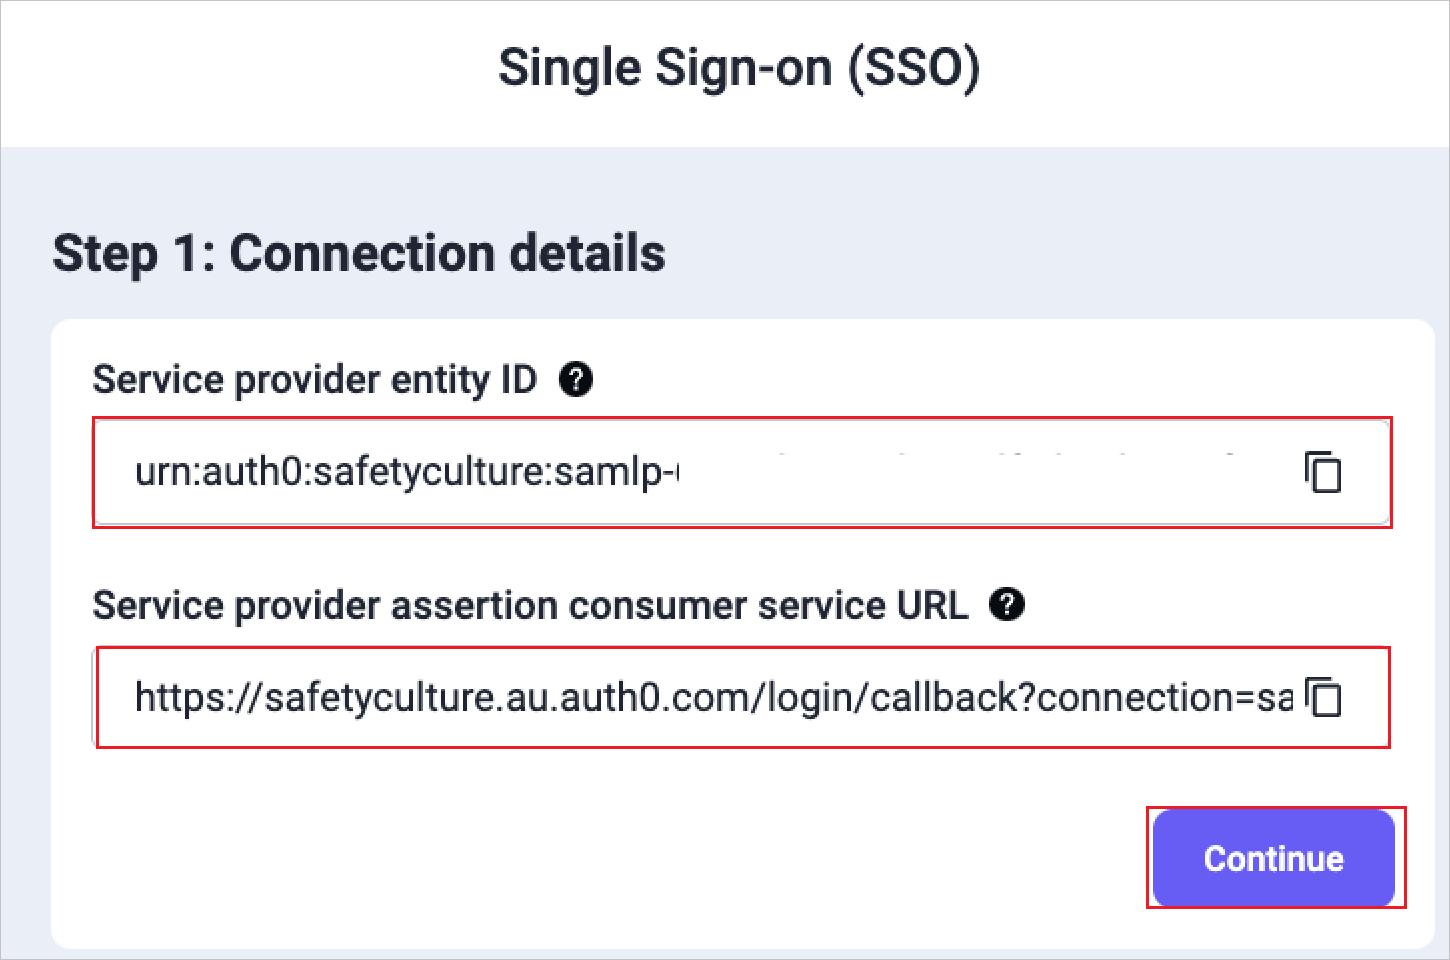 Screenshot shows sample SSO details from the SafetyCulture web app.